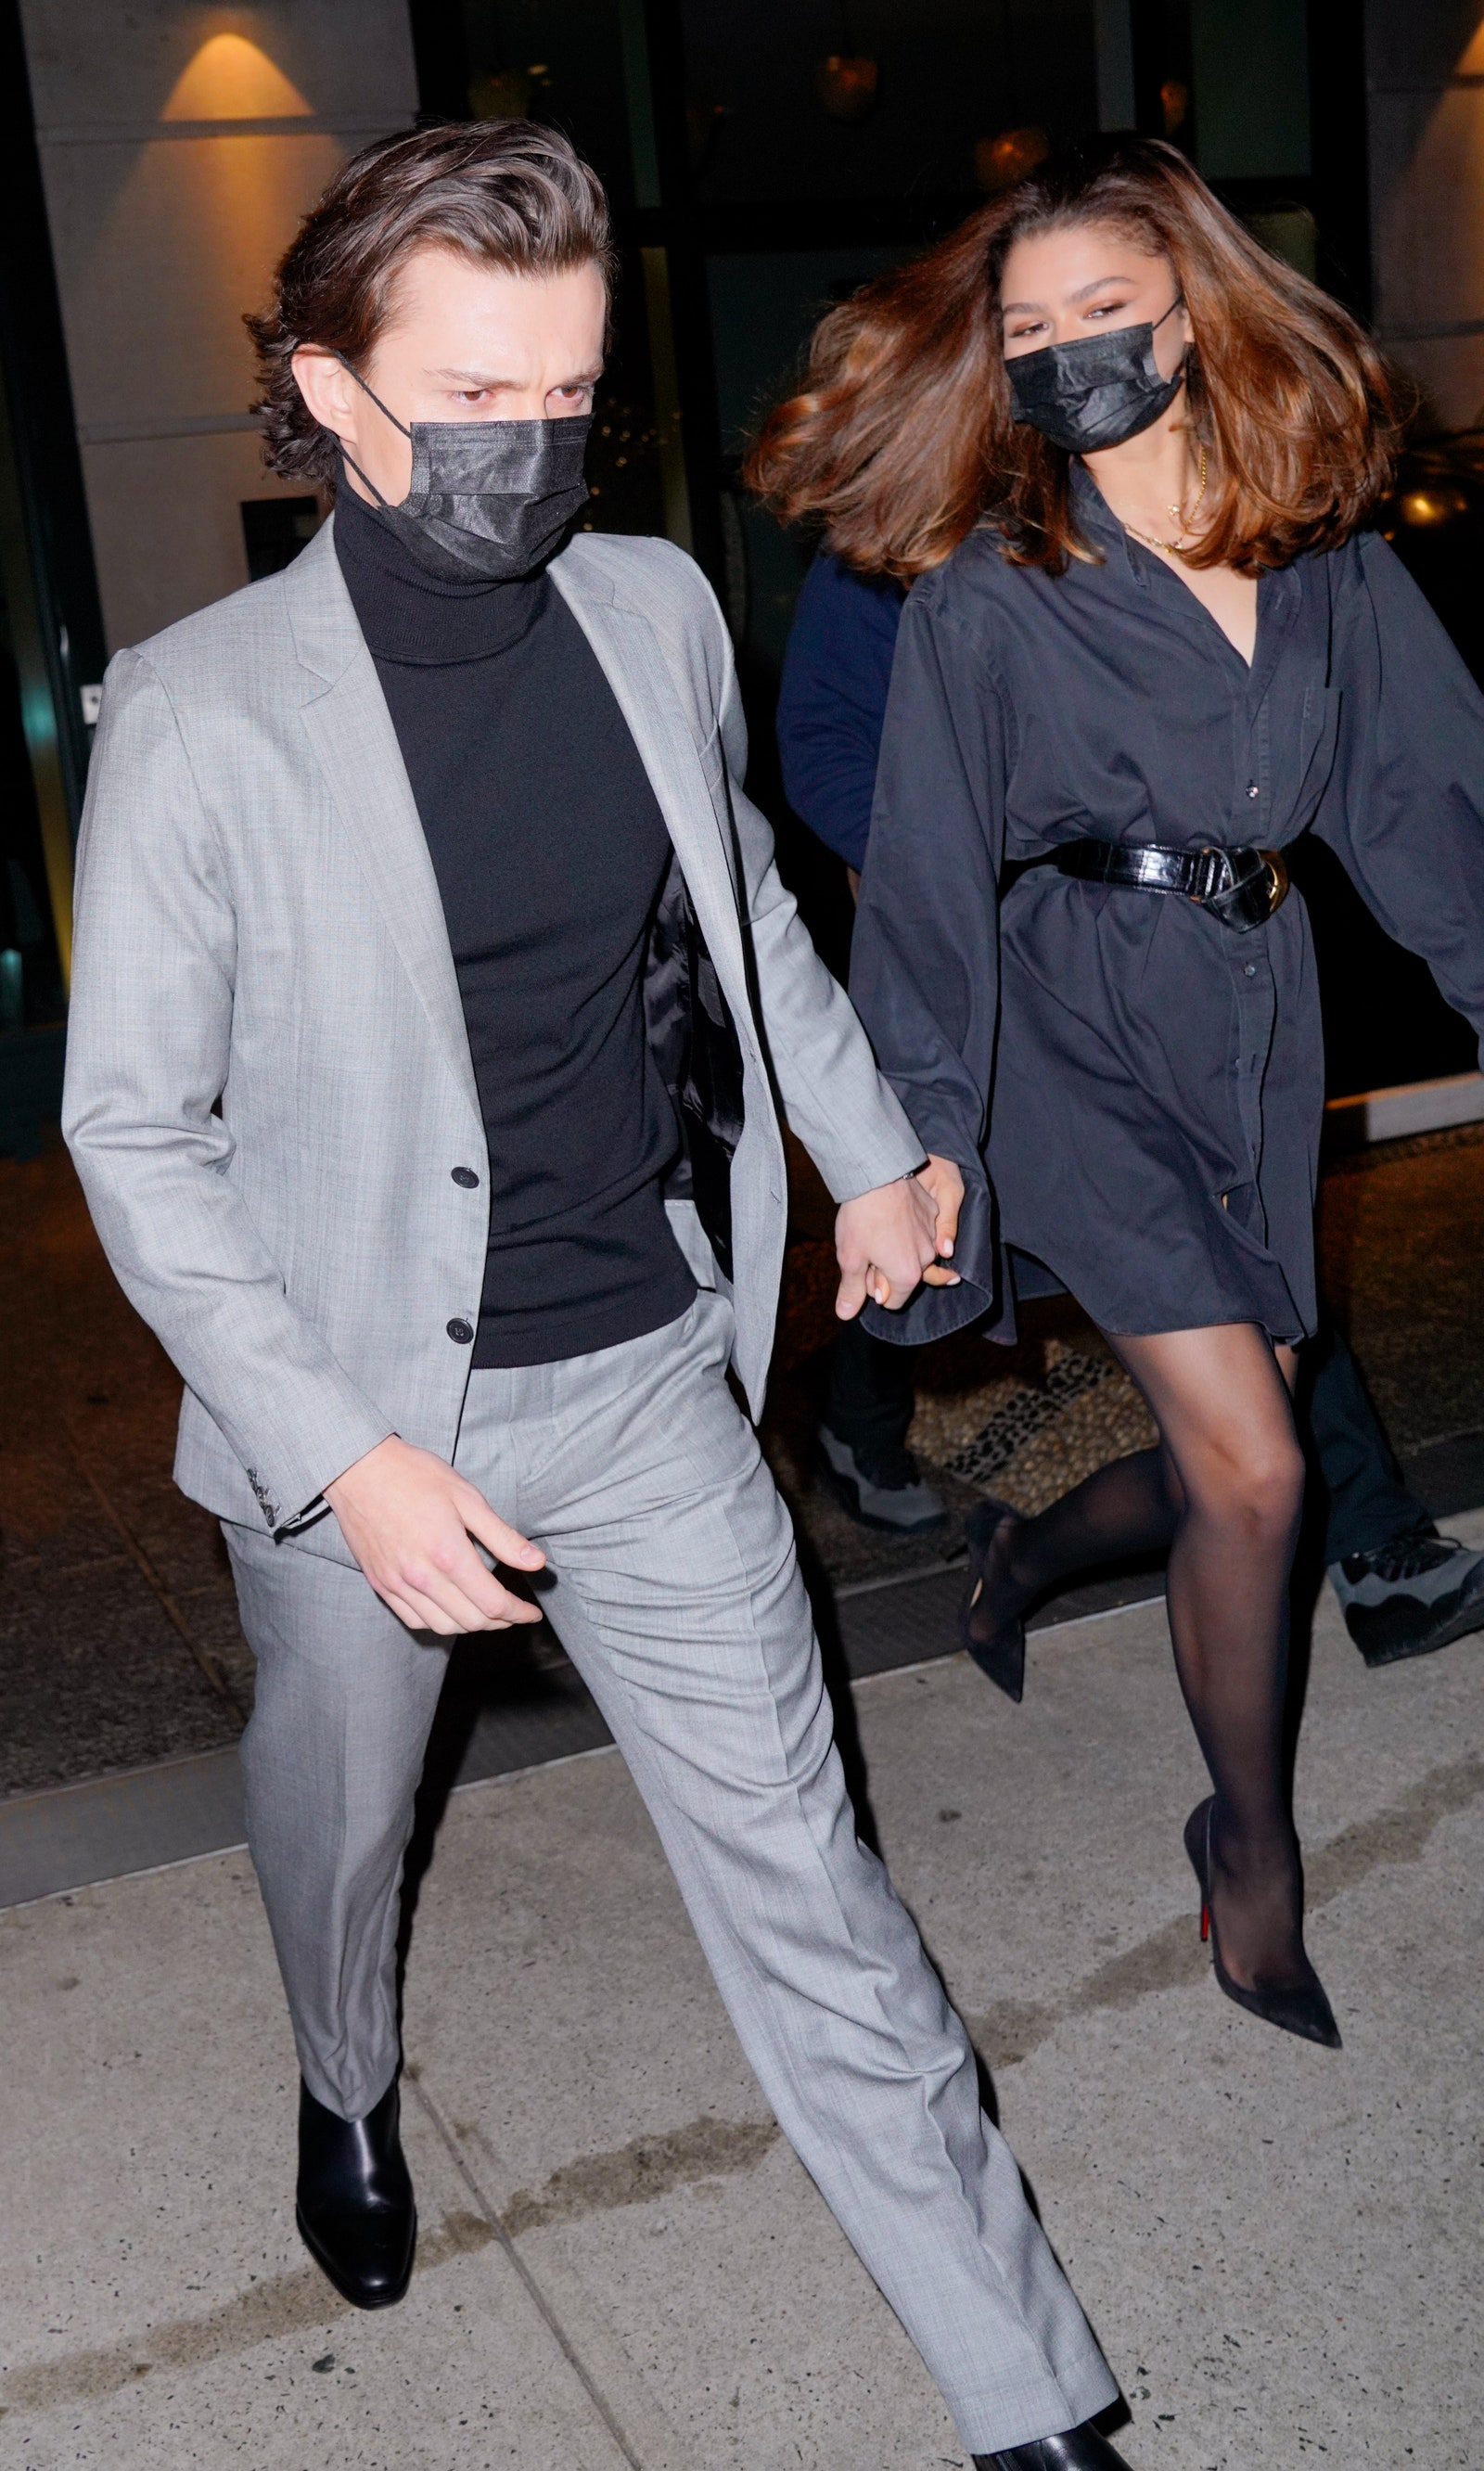 NEW YORK NEW YORK  FEBRUARY 16 Tom Holland and Zendaya are seen departing their hotel on February 16 2022 in New York City.